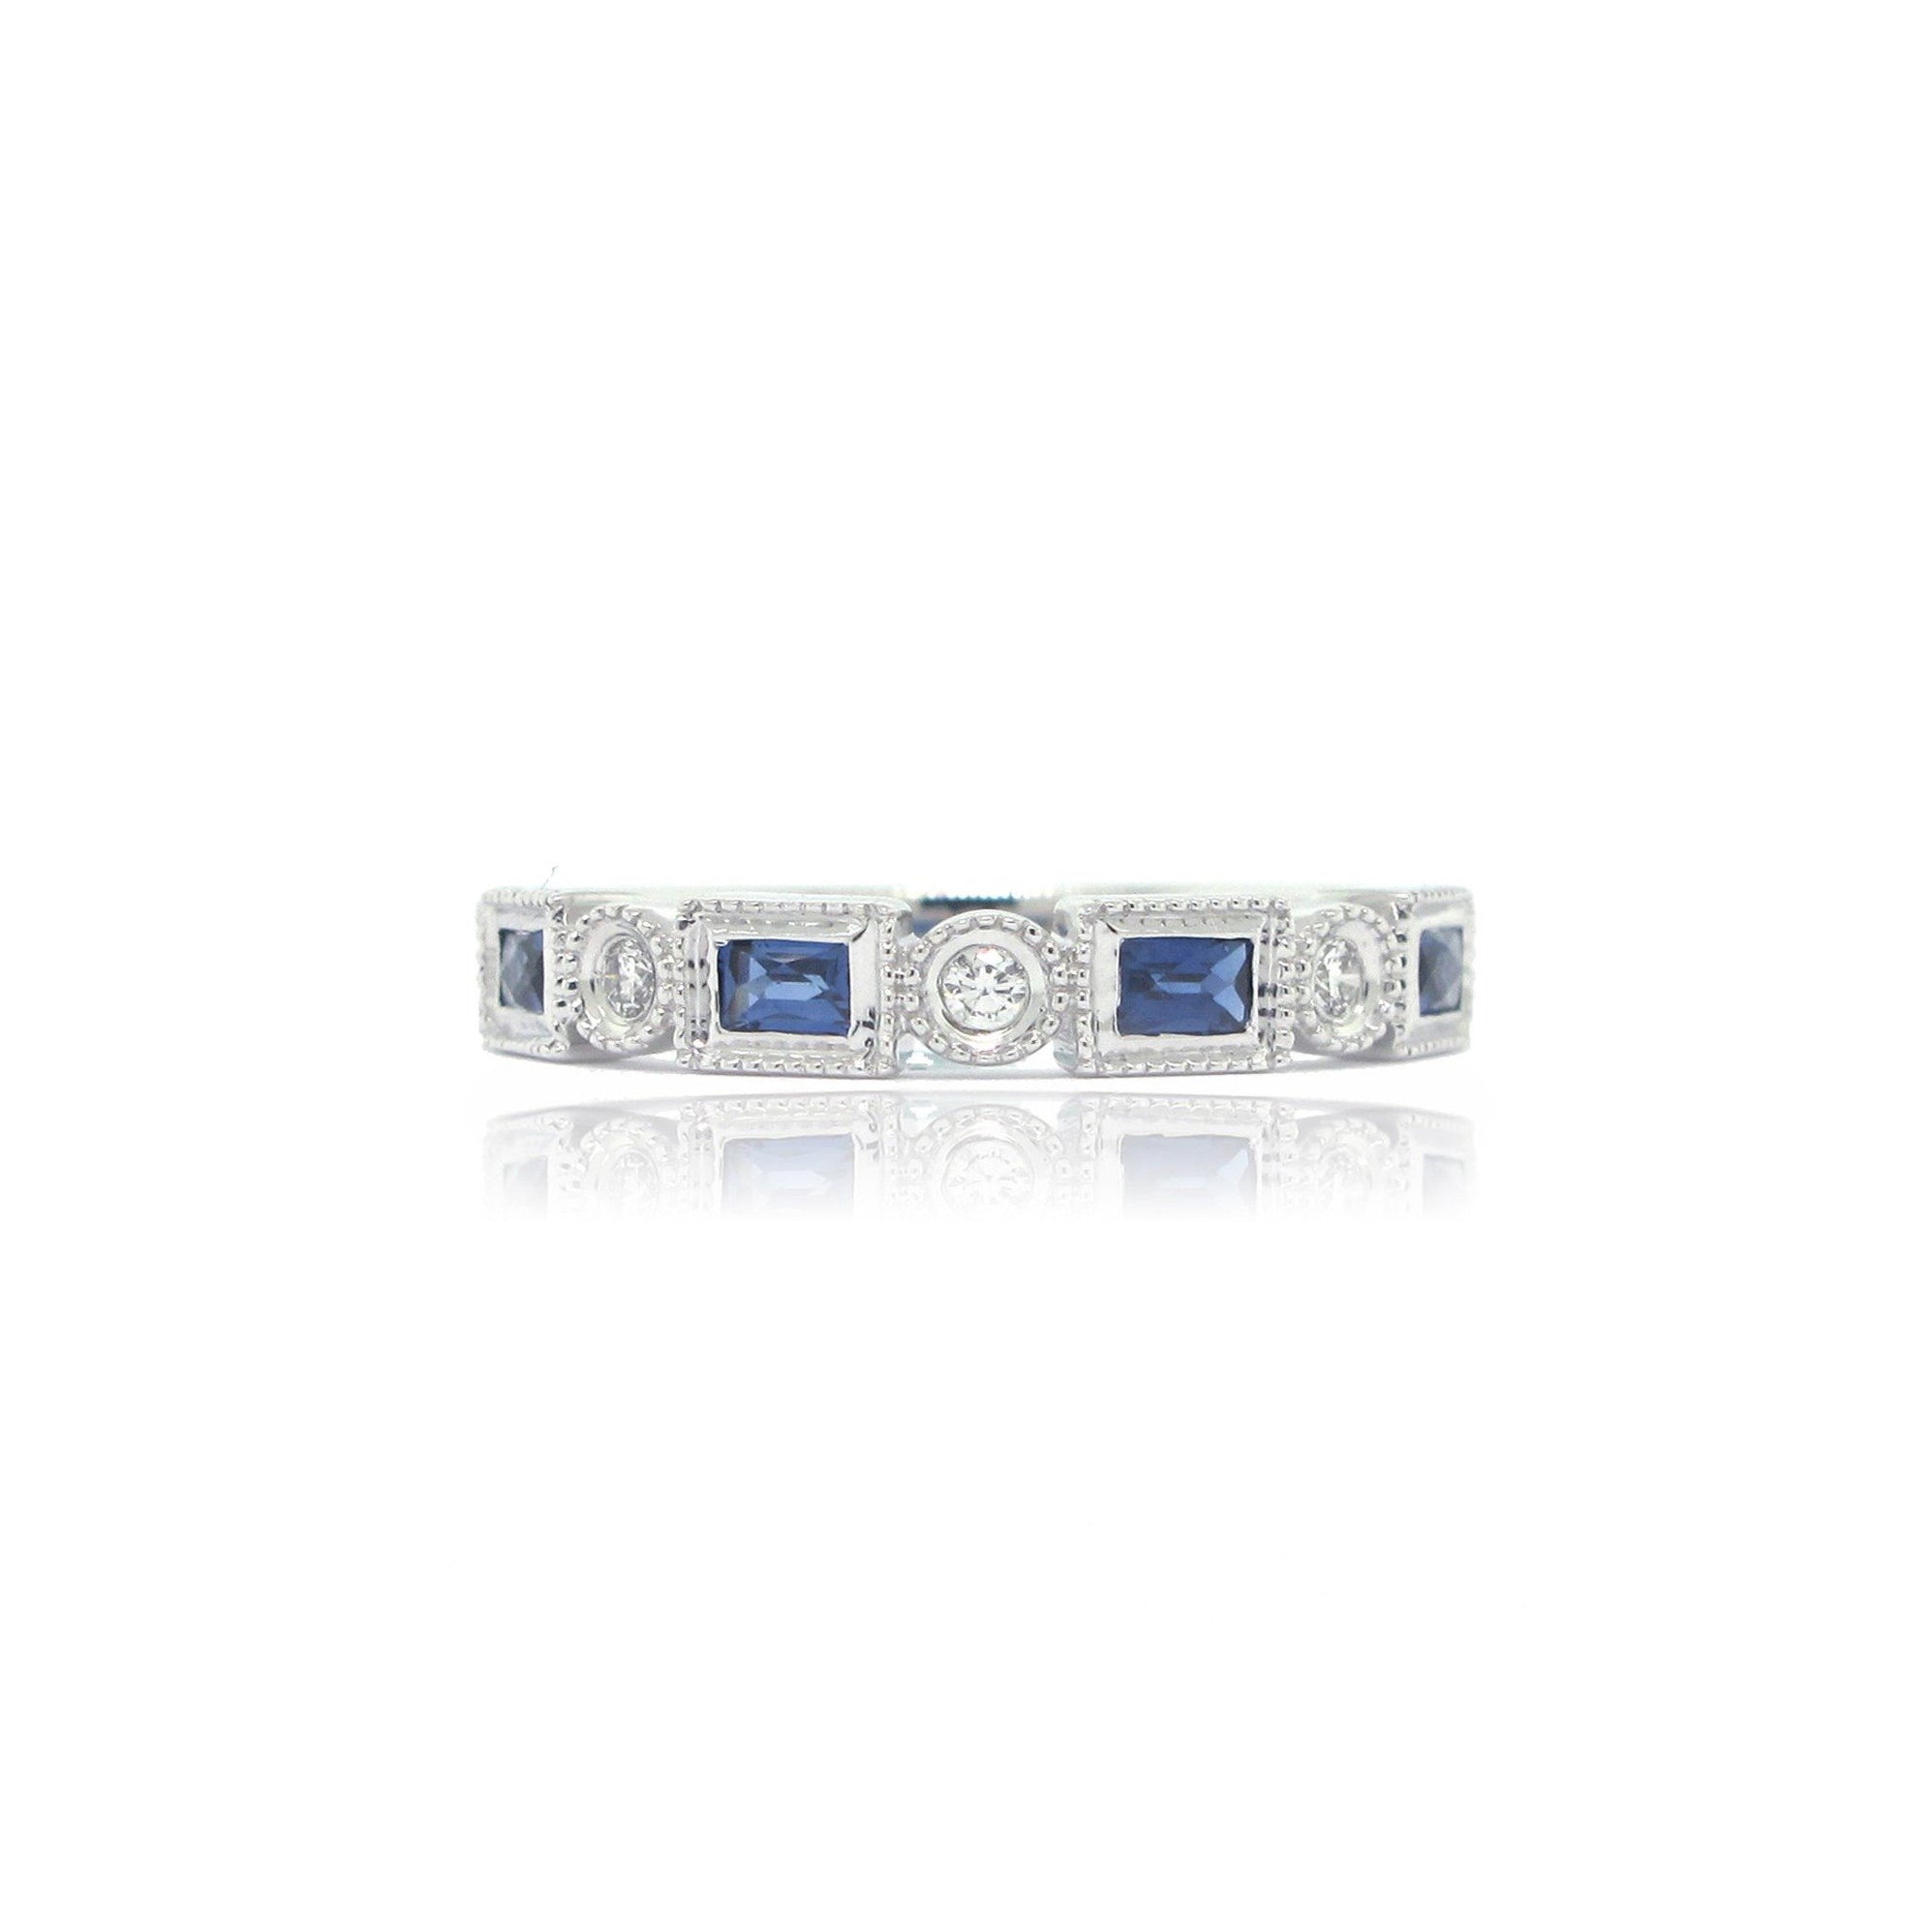 18K W/G Alternating Round Diamond and Baguette Sapphire Ring